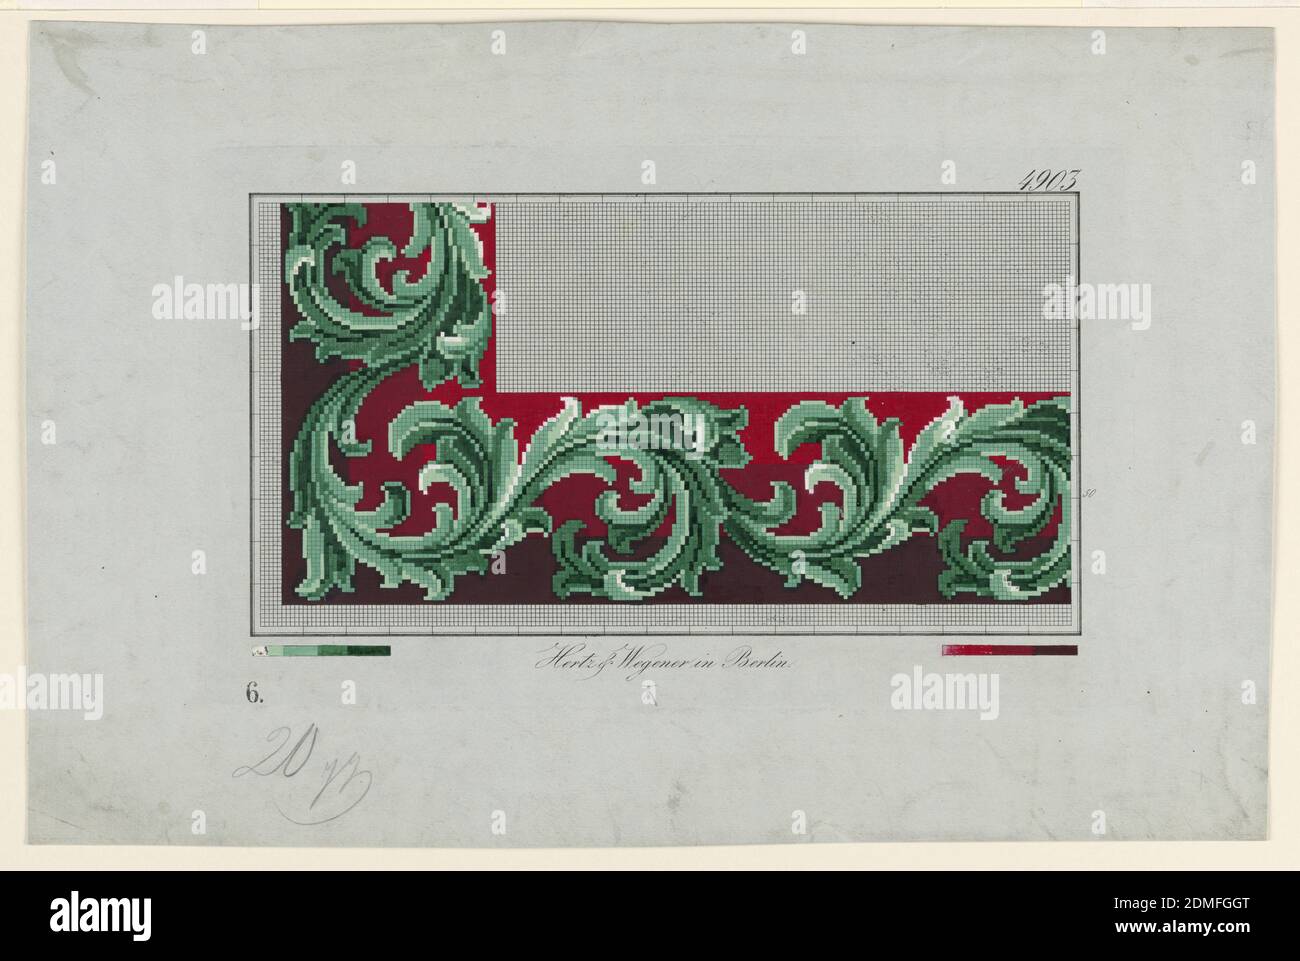 Design for Wool Work, Hertz and Wegener, Brush and gouache on pre-printed squared paper, A design on squared paper, of a border of stylized acanthus leaves in shades of green against a background of three bands of red, shaded from vermilion to maroon., Germany, ca. 1866, textile designs, Drawing Stock Photo